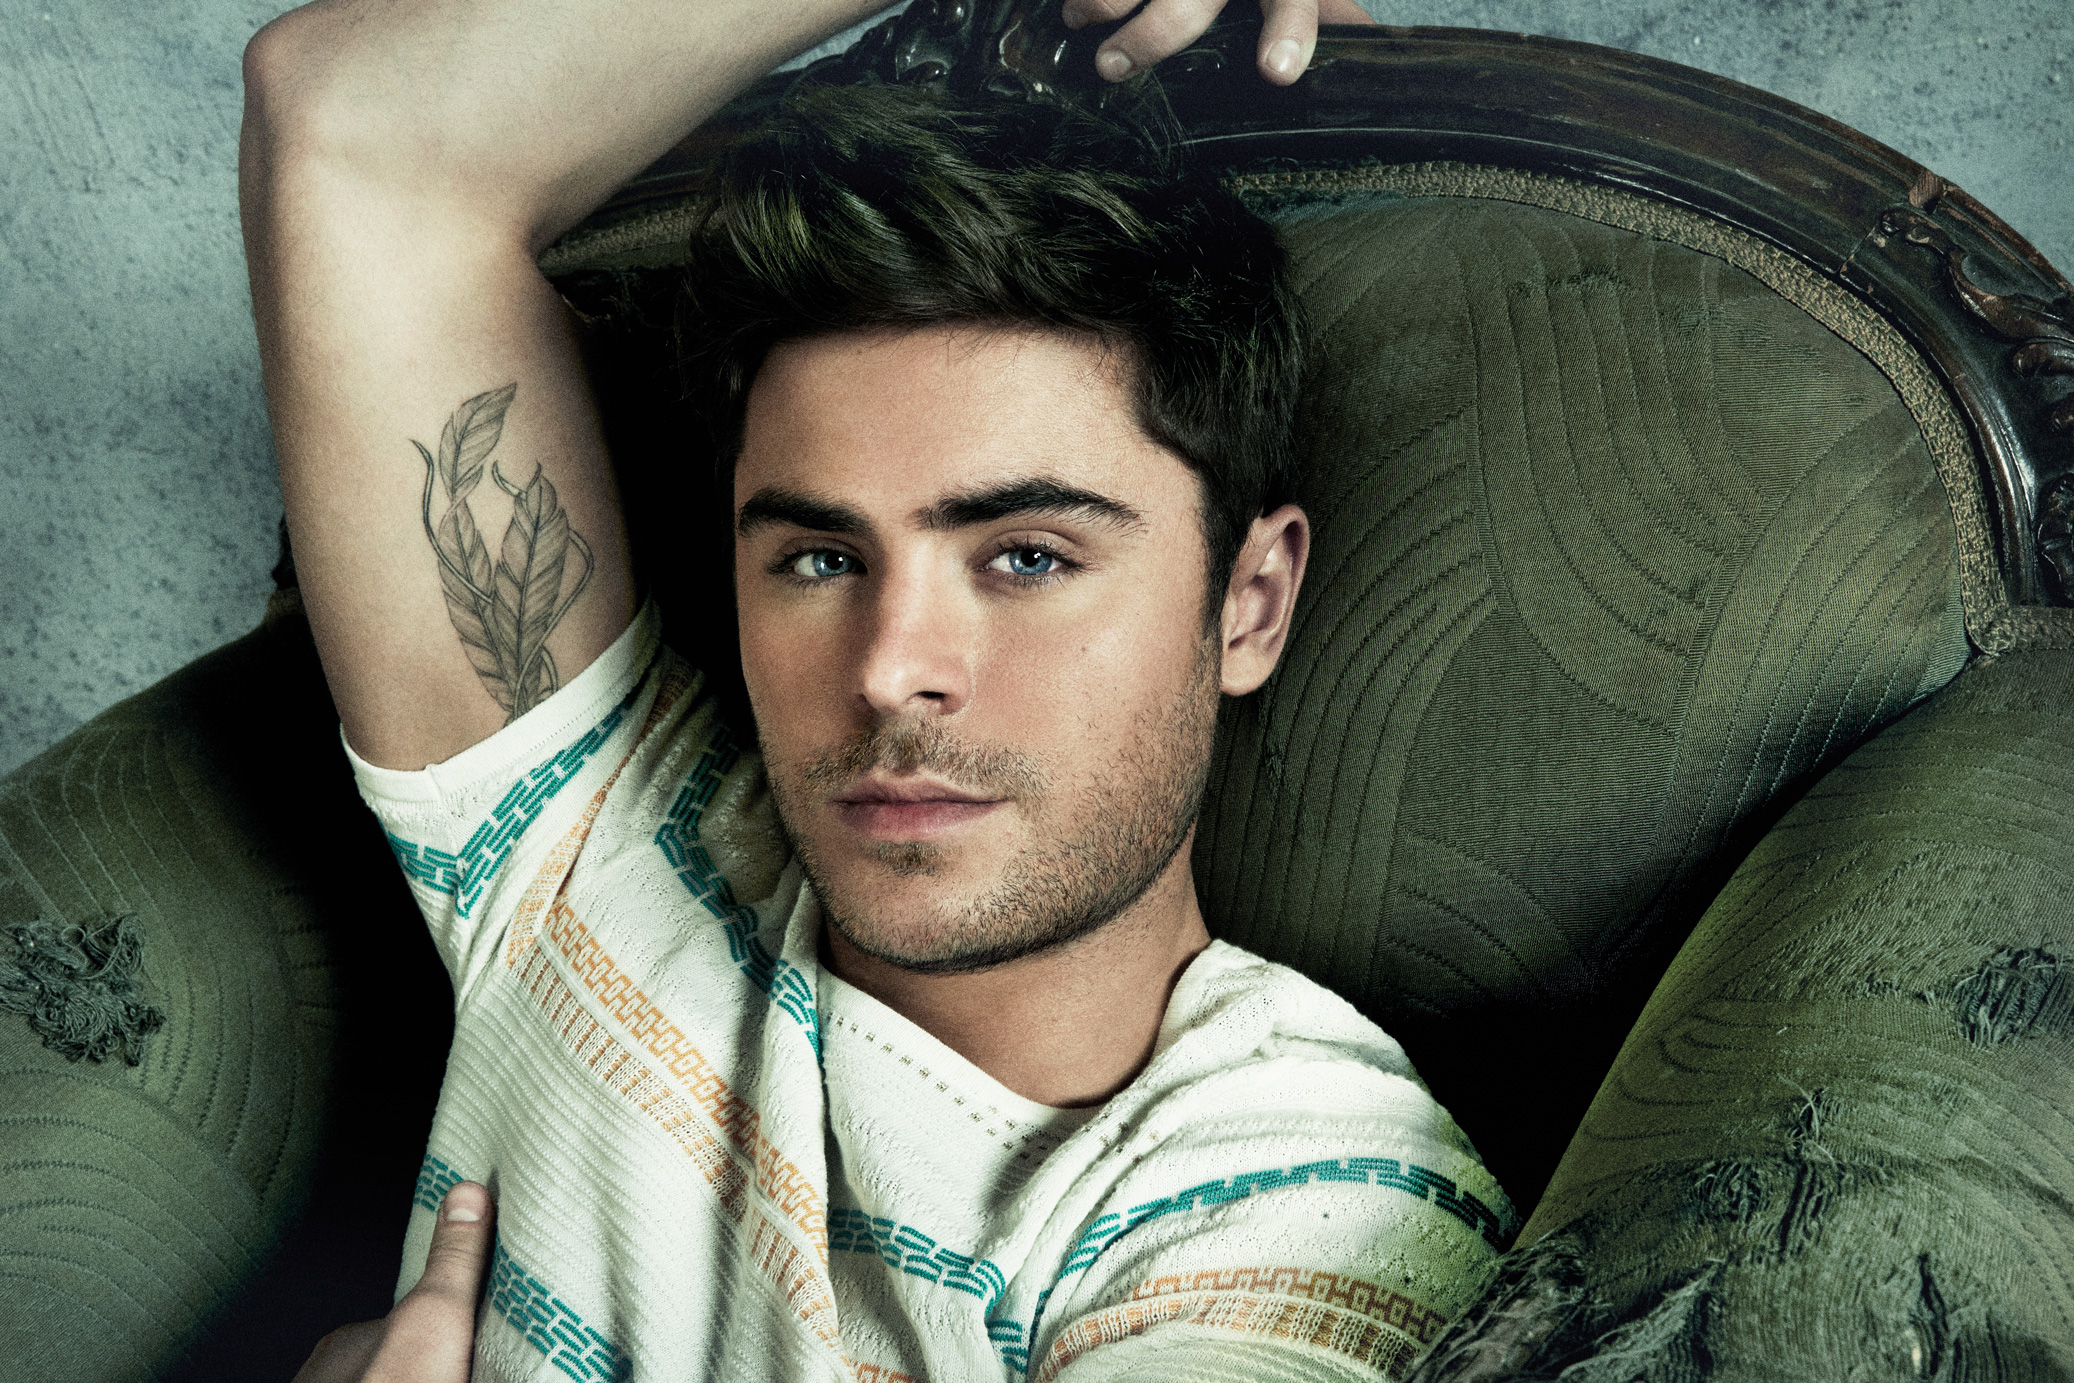 You got: Zac Efron! 🎄 Decorate Your House for Christmas and We’ll Give You a Hot Celeb to Kiss Under the Mistletoe